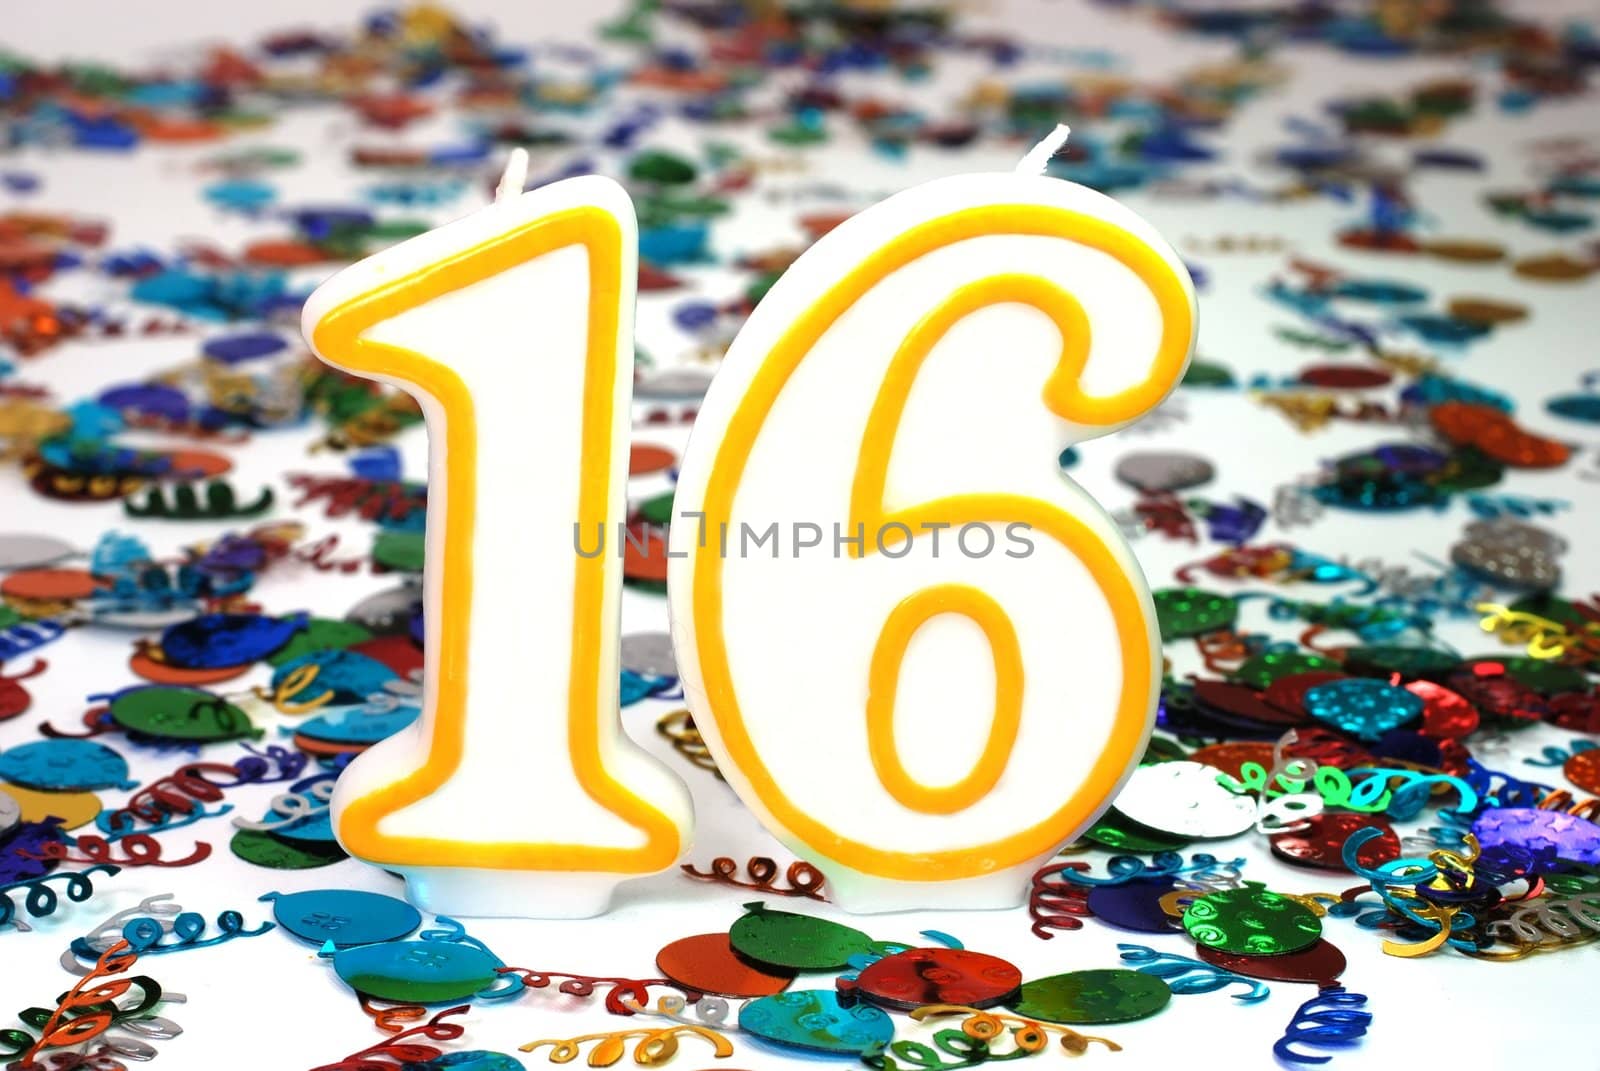 Number 16 celebration candle with confetti.